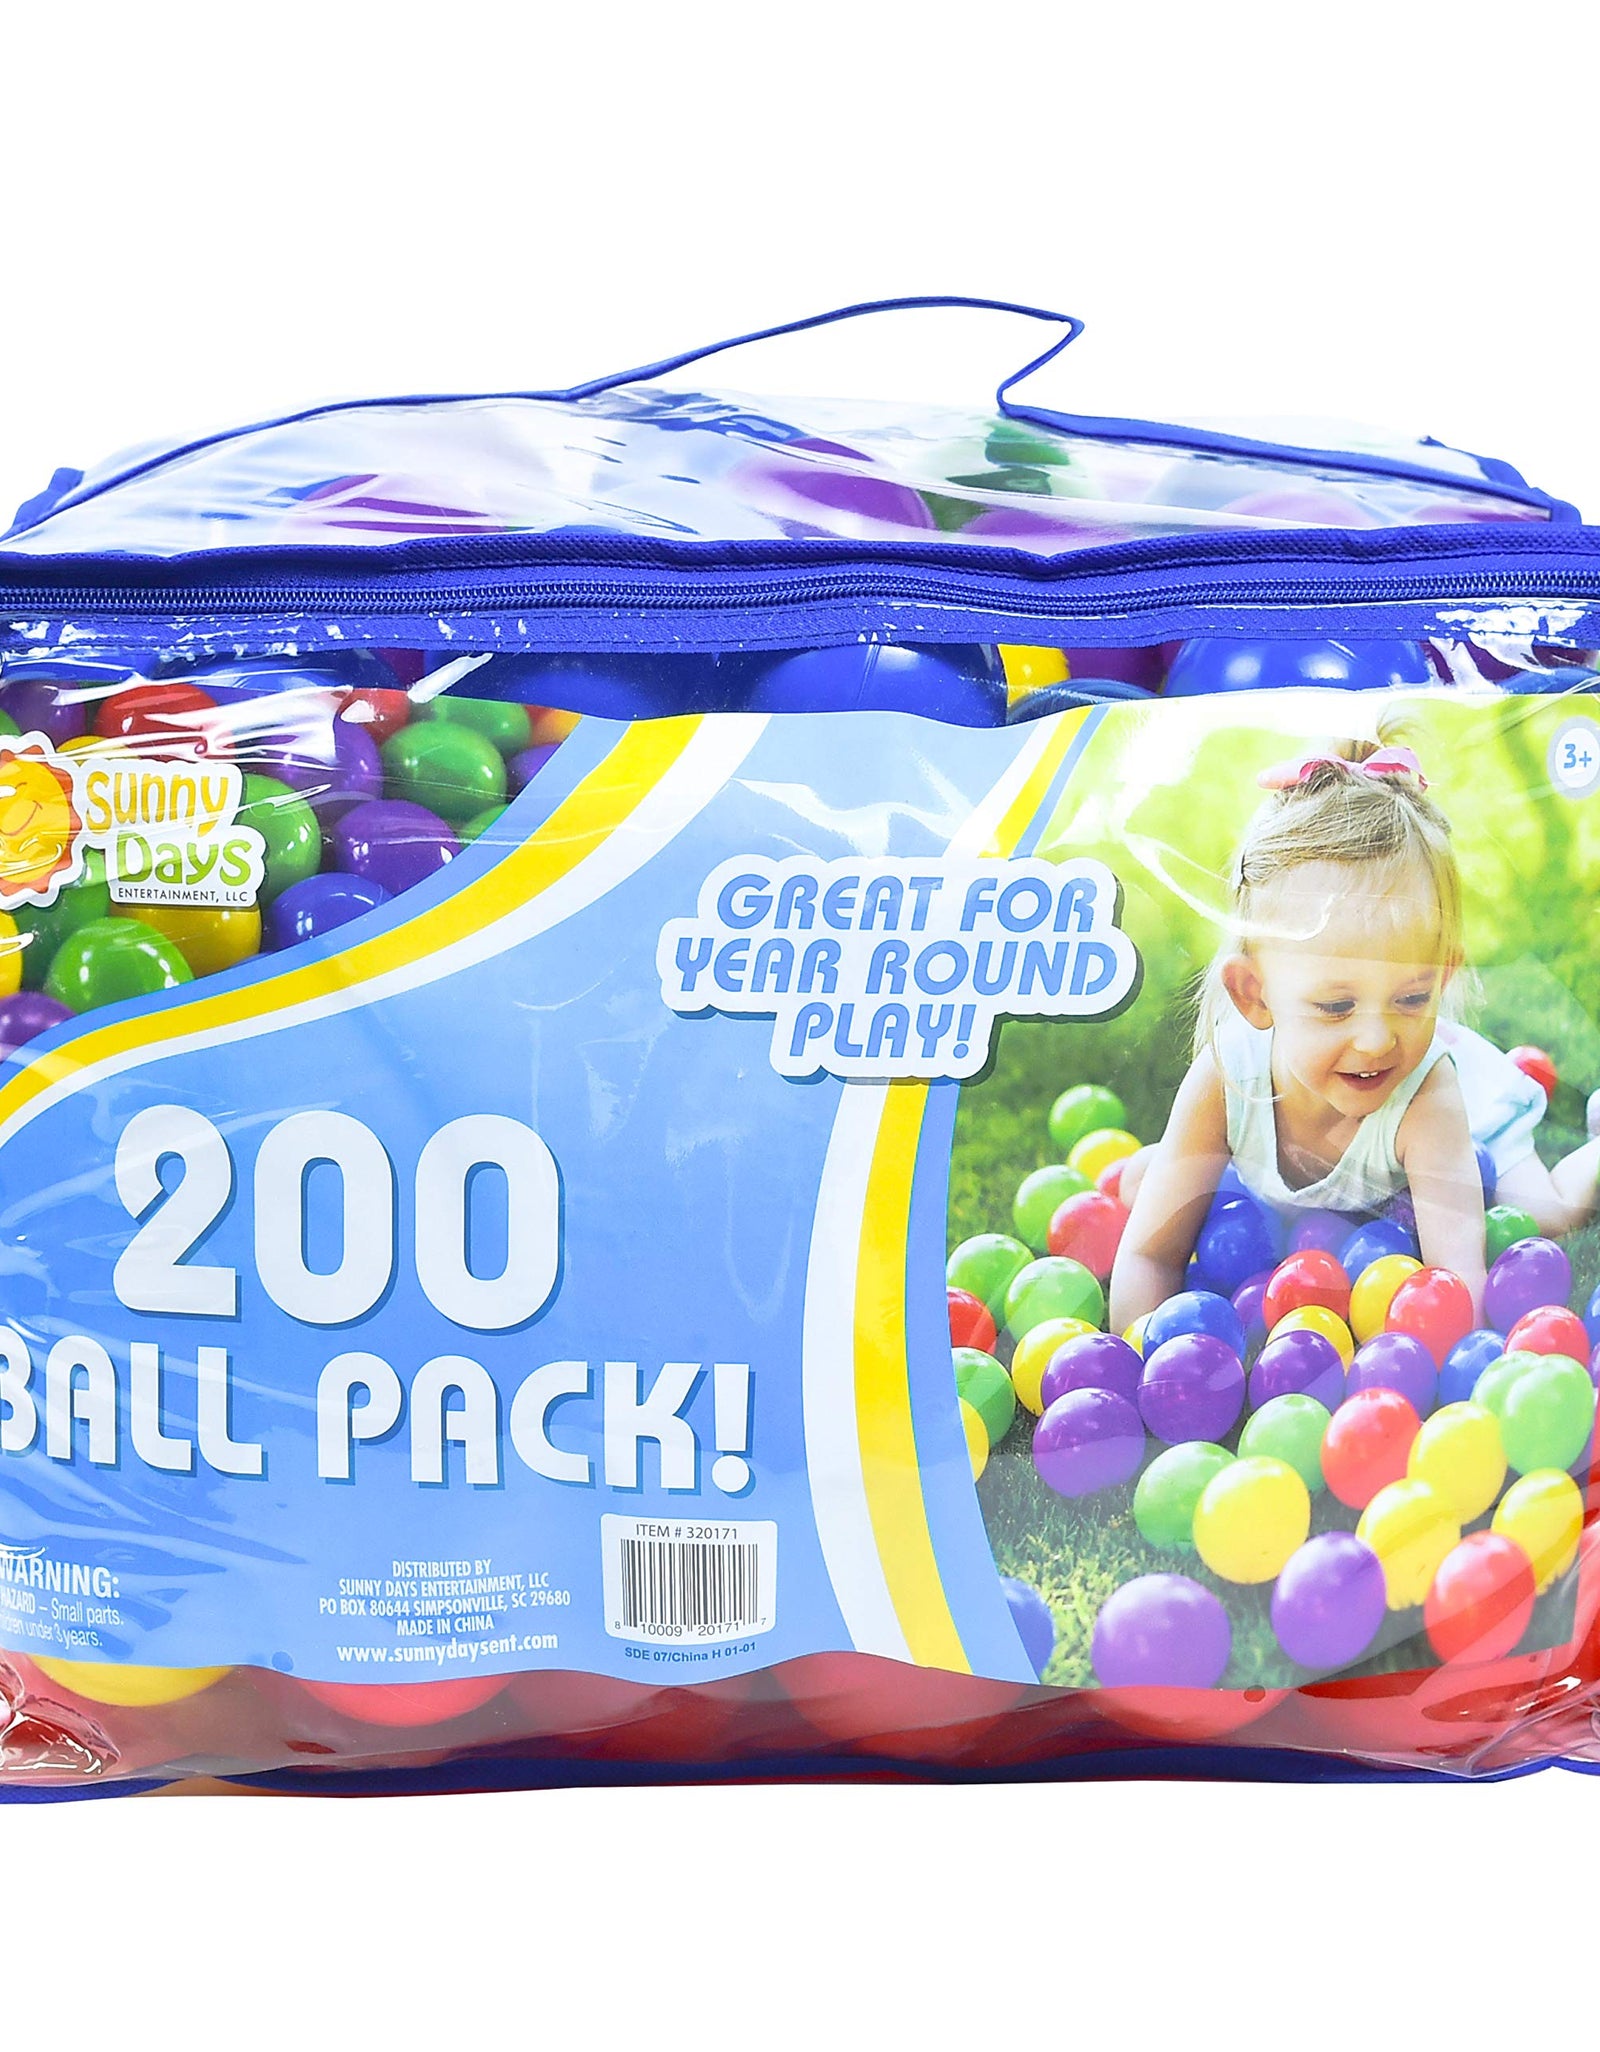 200 Count Colorful Play Balls – Phthalate and BPA Free Non-Toxic Crush Proof Plastic Ball Pack - Balls for Toddler Ball Pit in Reusable Storage Bag with Zipper – Sunny Days Entertainment